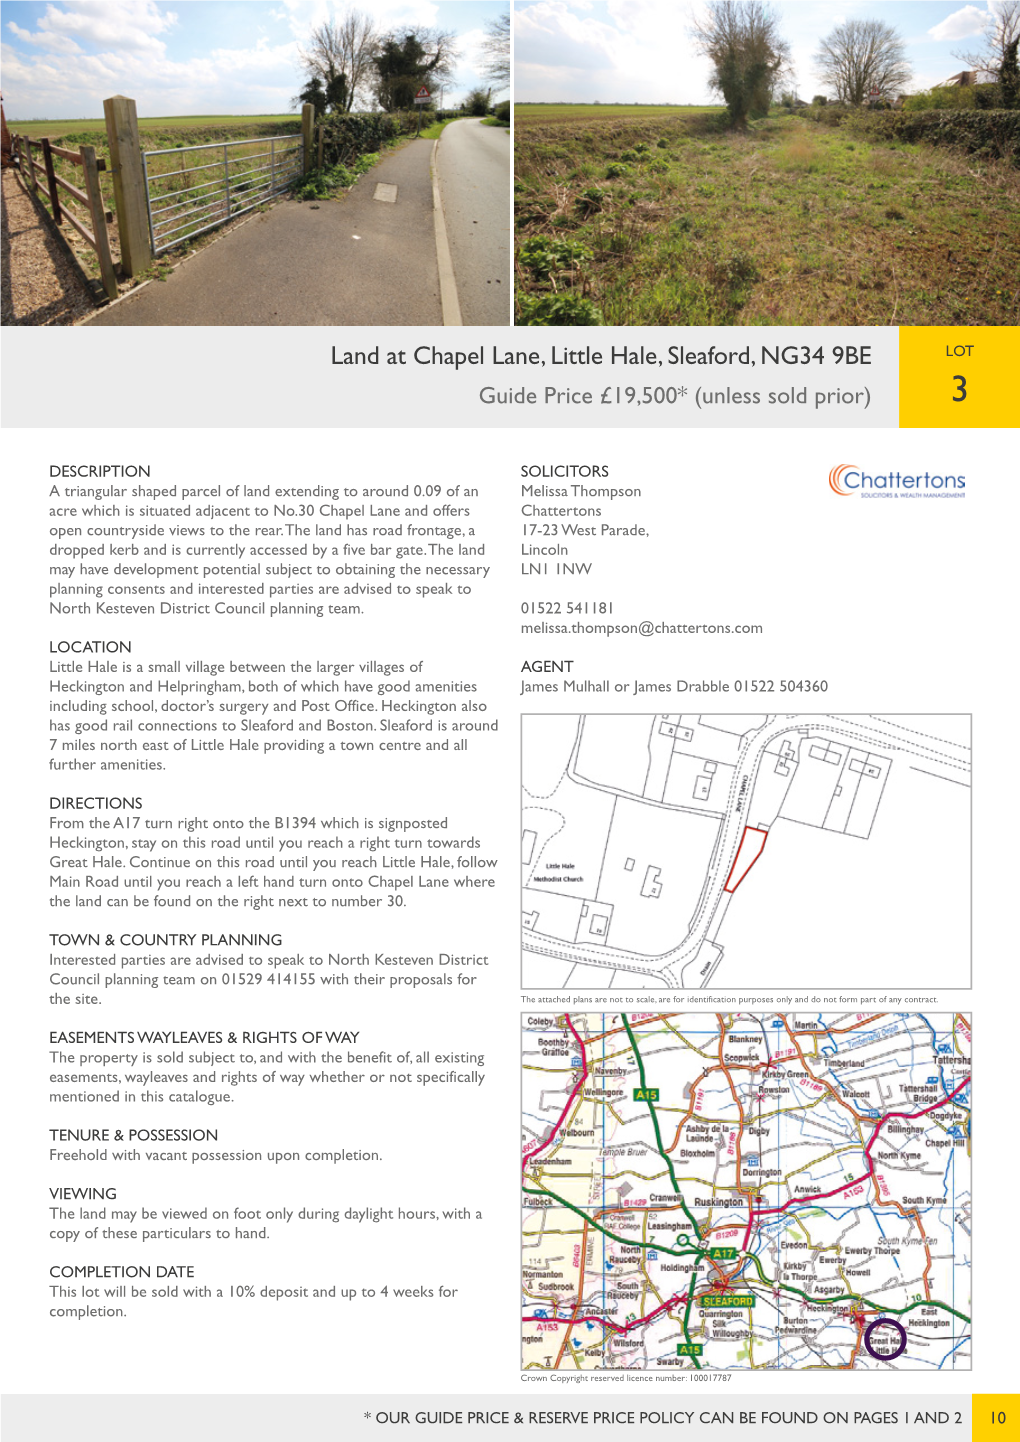 Land at Chapel Lane, Little Hale, Sleaford, NG34 9BE LOT Guide Price £19,500* (Unless Sold Prior) 3